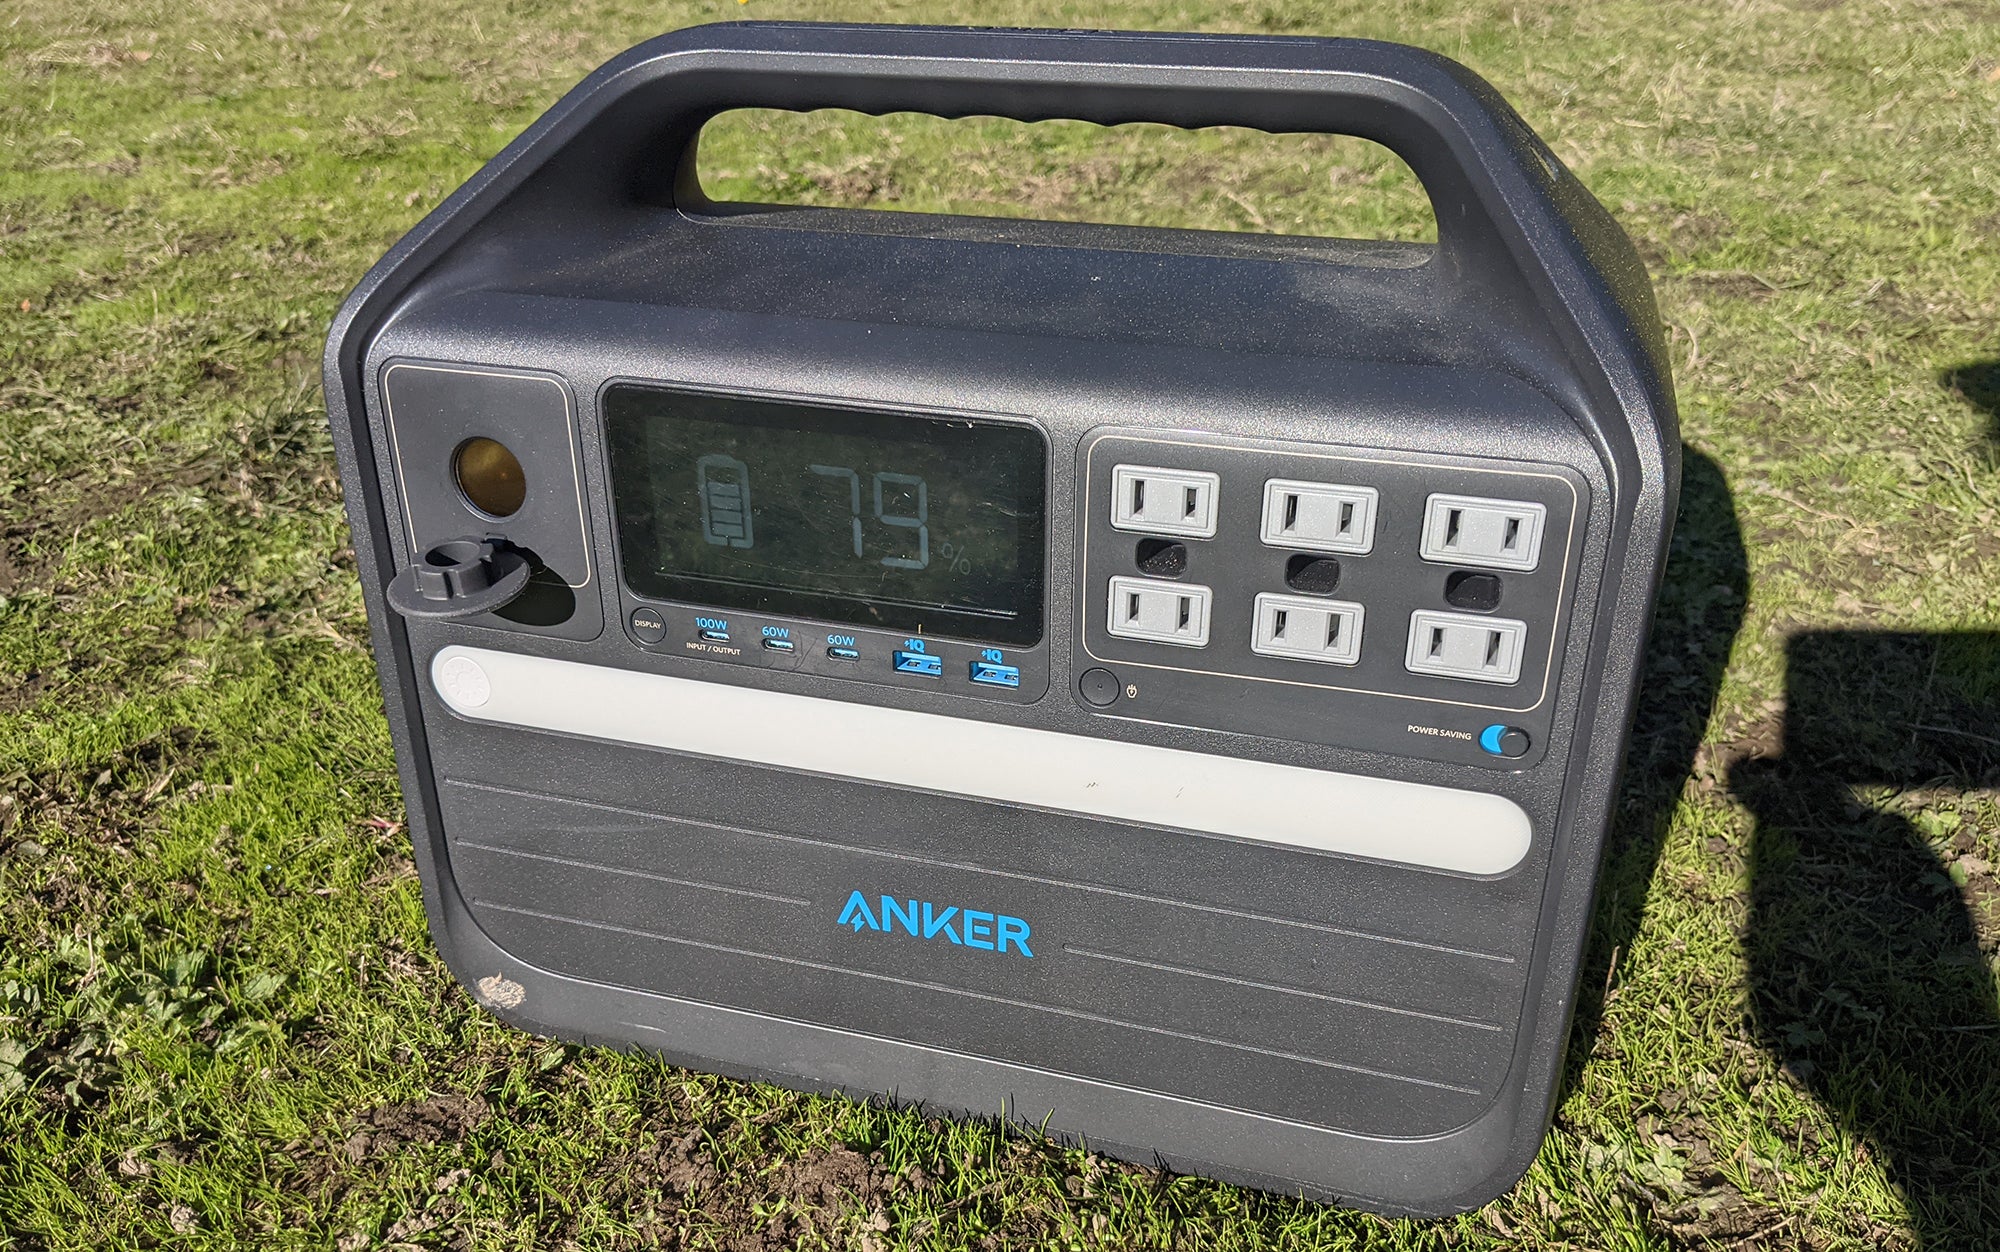 The Anker 555 sits in the grass.